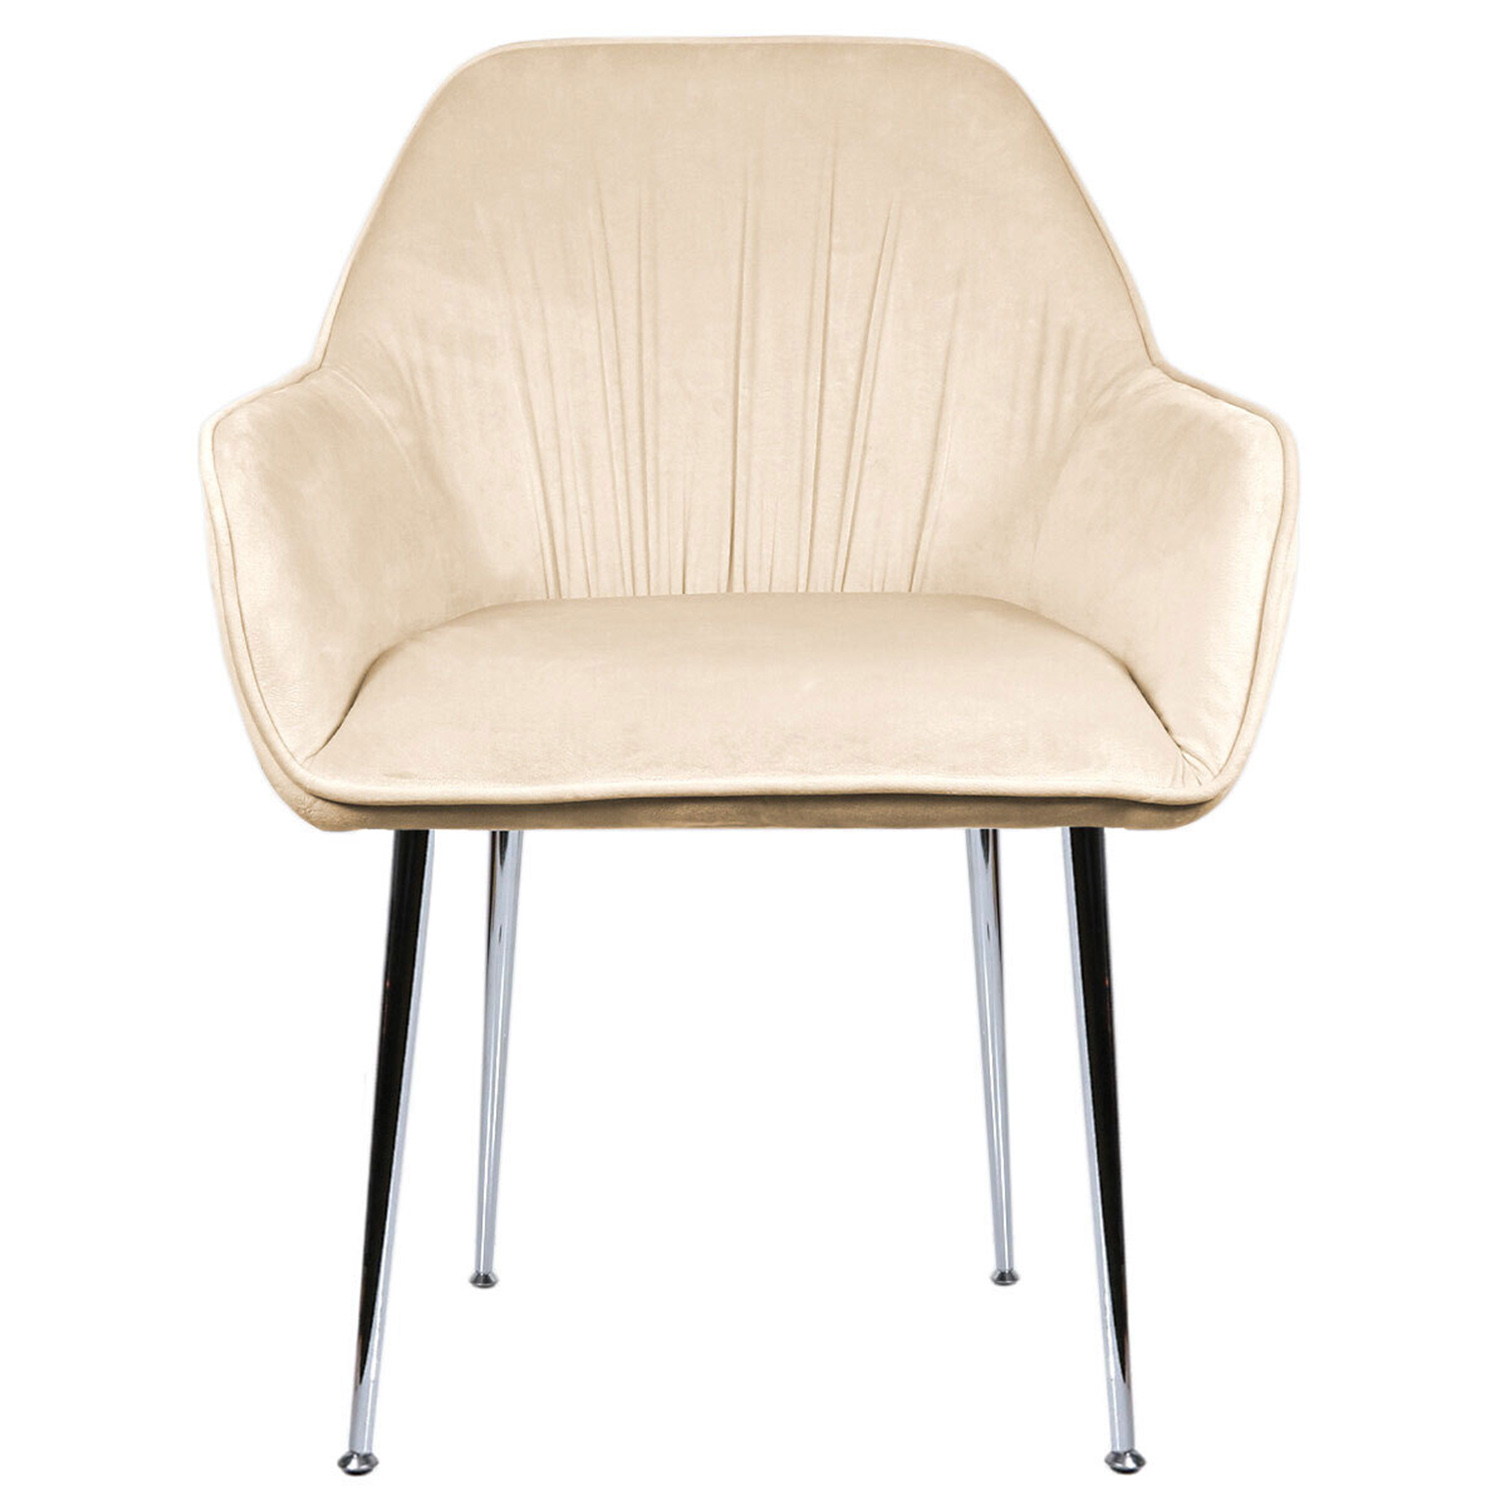 Alexis Cream Pleated Dining Chair Image 2